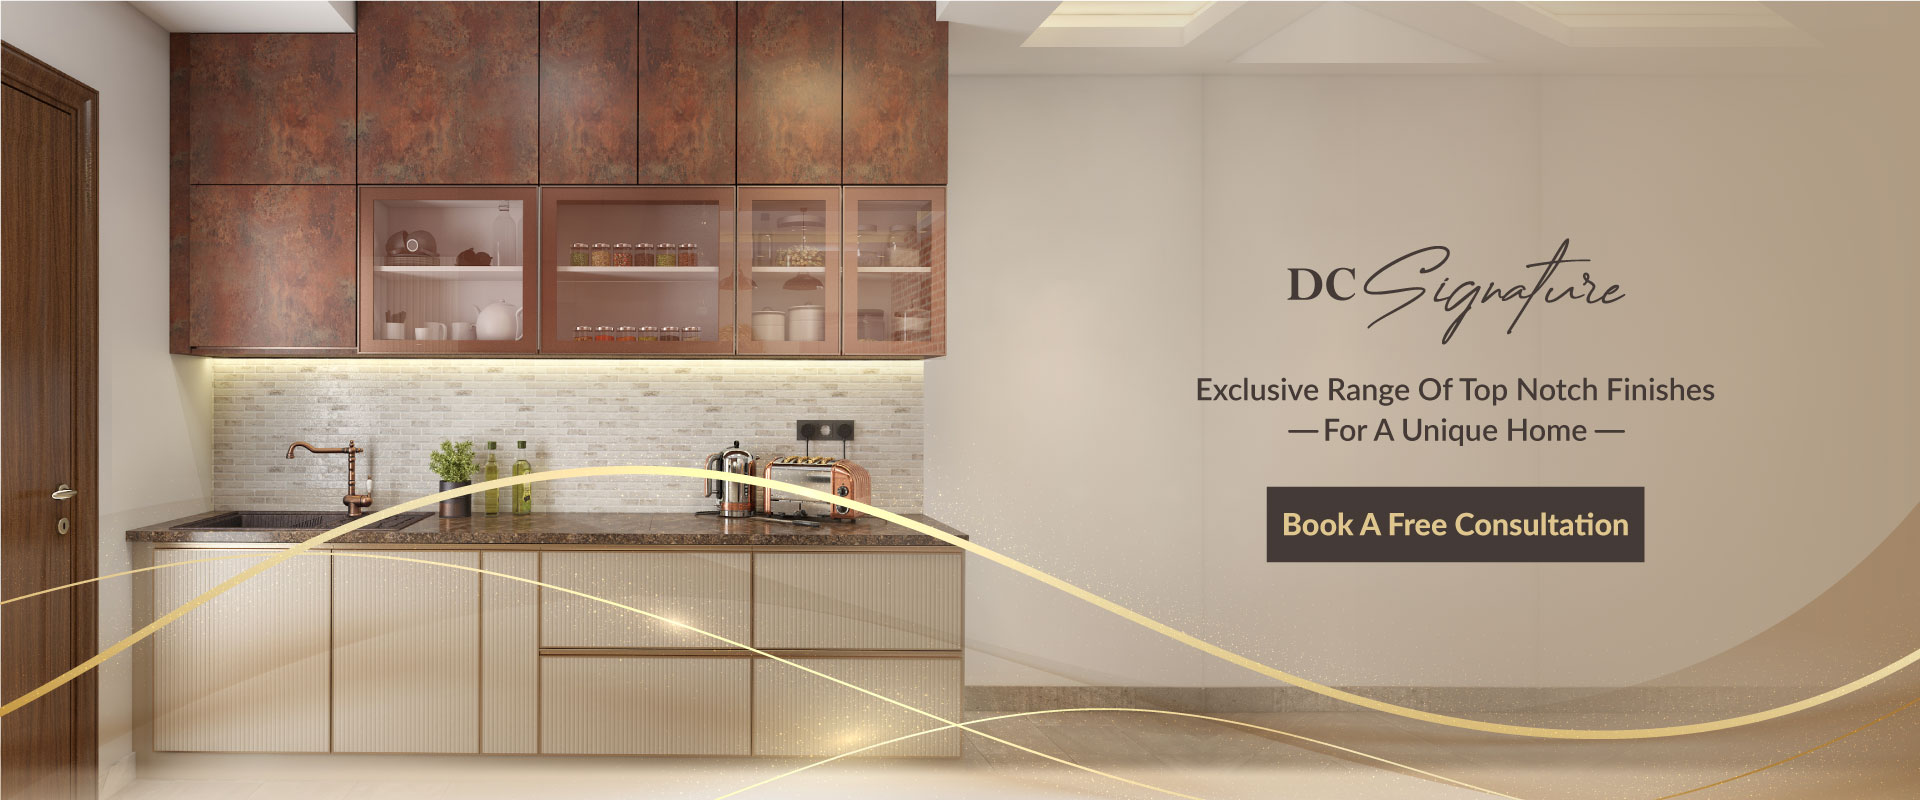 DC Signature specializes in creating premium interior designs for high-end and luxury residences